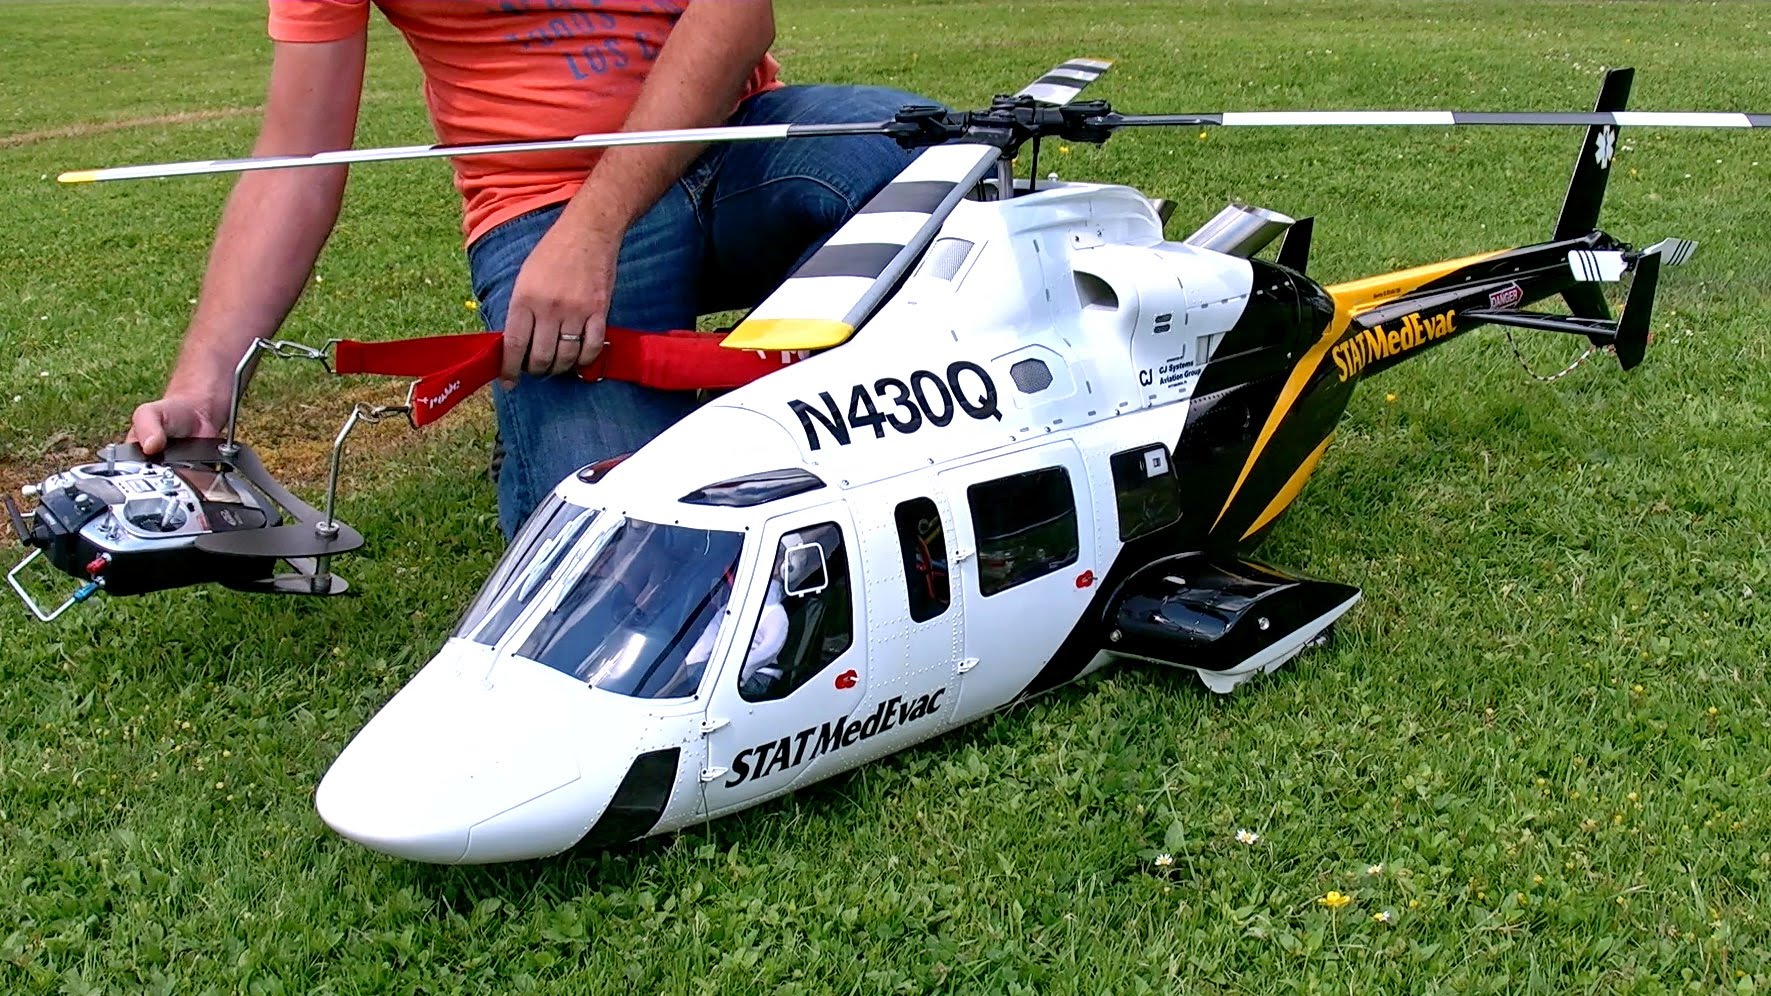 vario scale helicopters